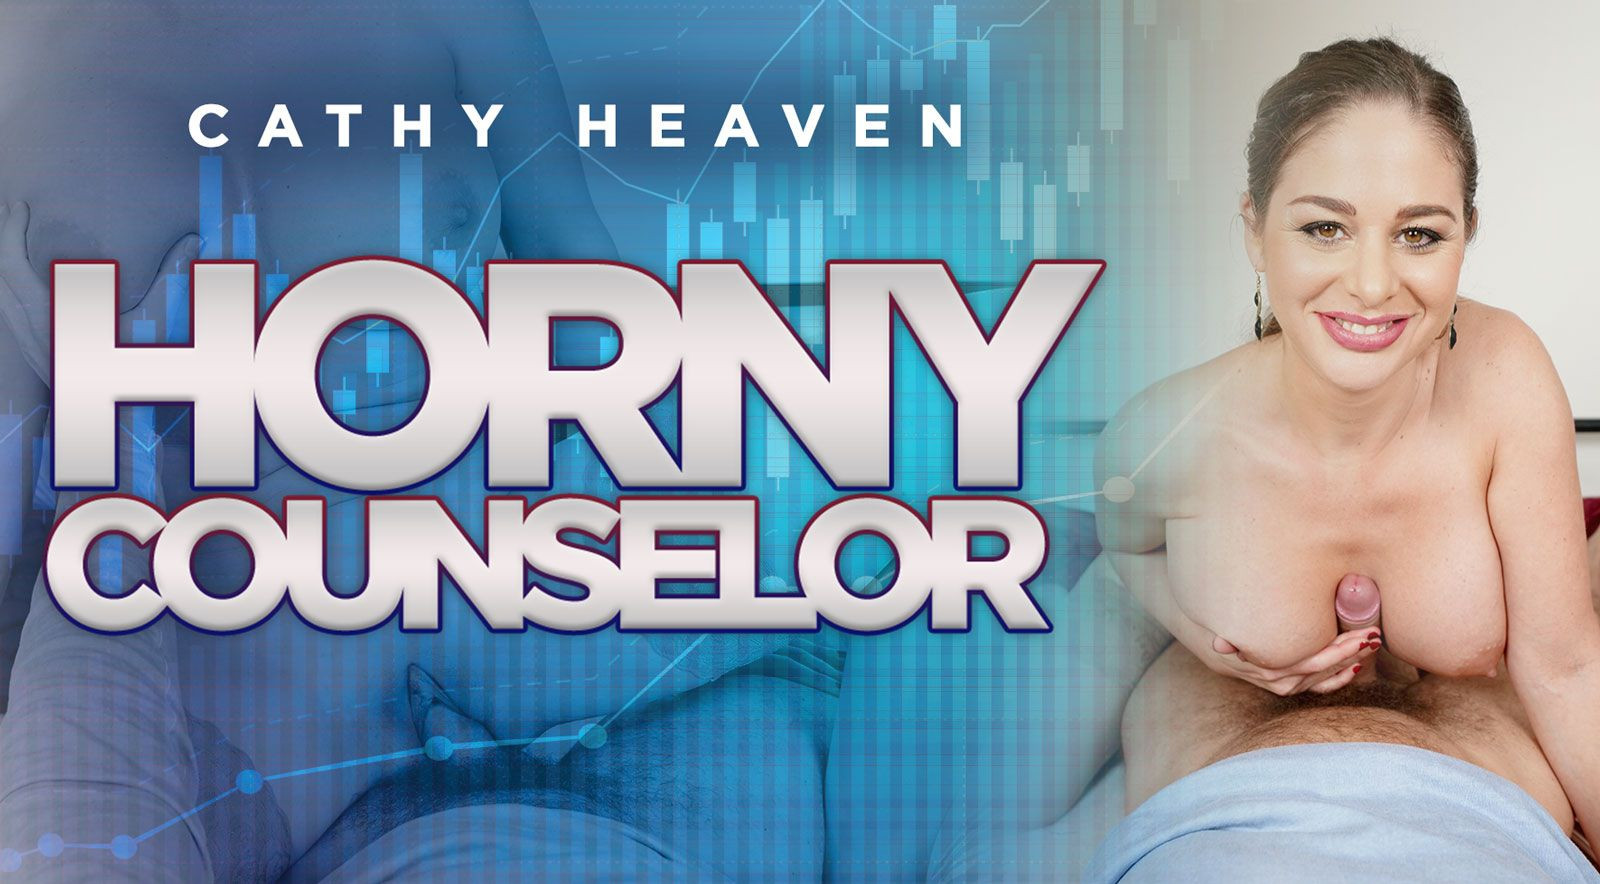 The Horny Counselor: Cathy Heaven Slideshow